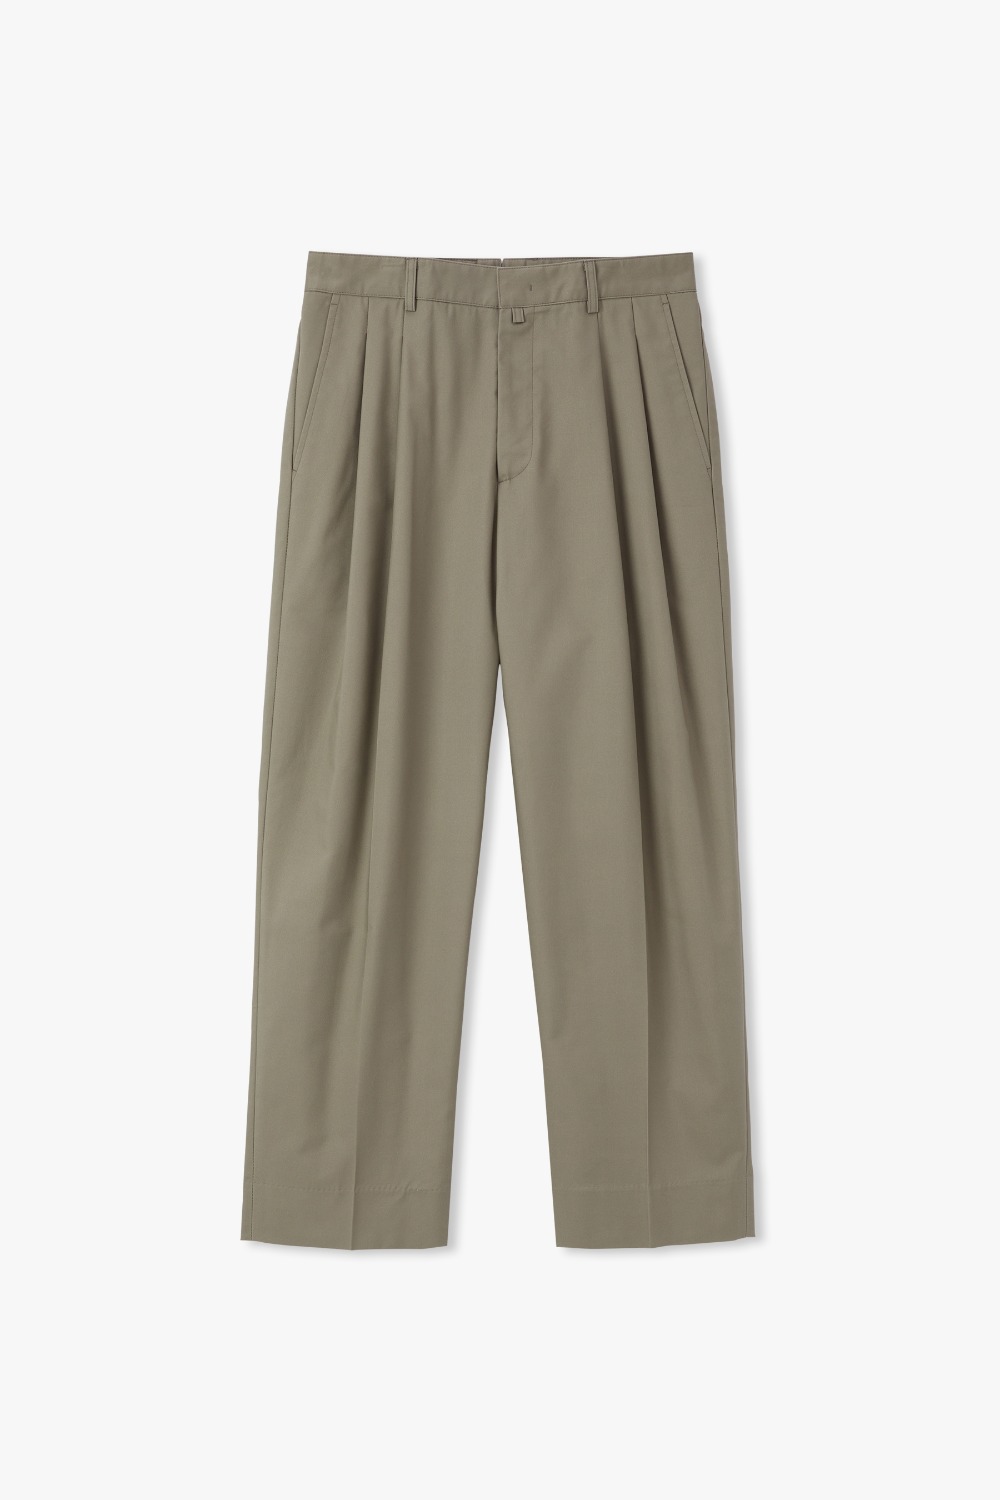 HAZEL WOOD R-802 TWO TUCK TAPERED COTTON DRILL CHINO PANTS (ECP MACHINE WASH TEST)